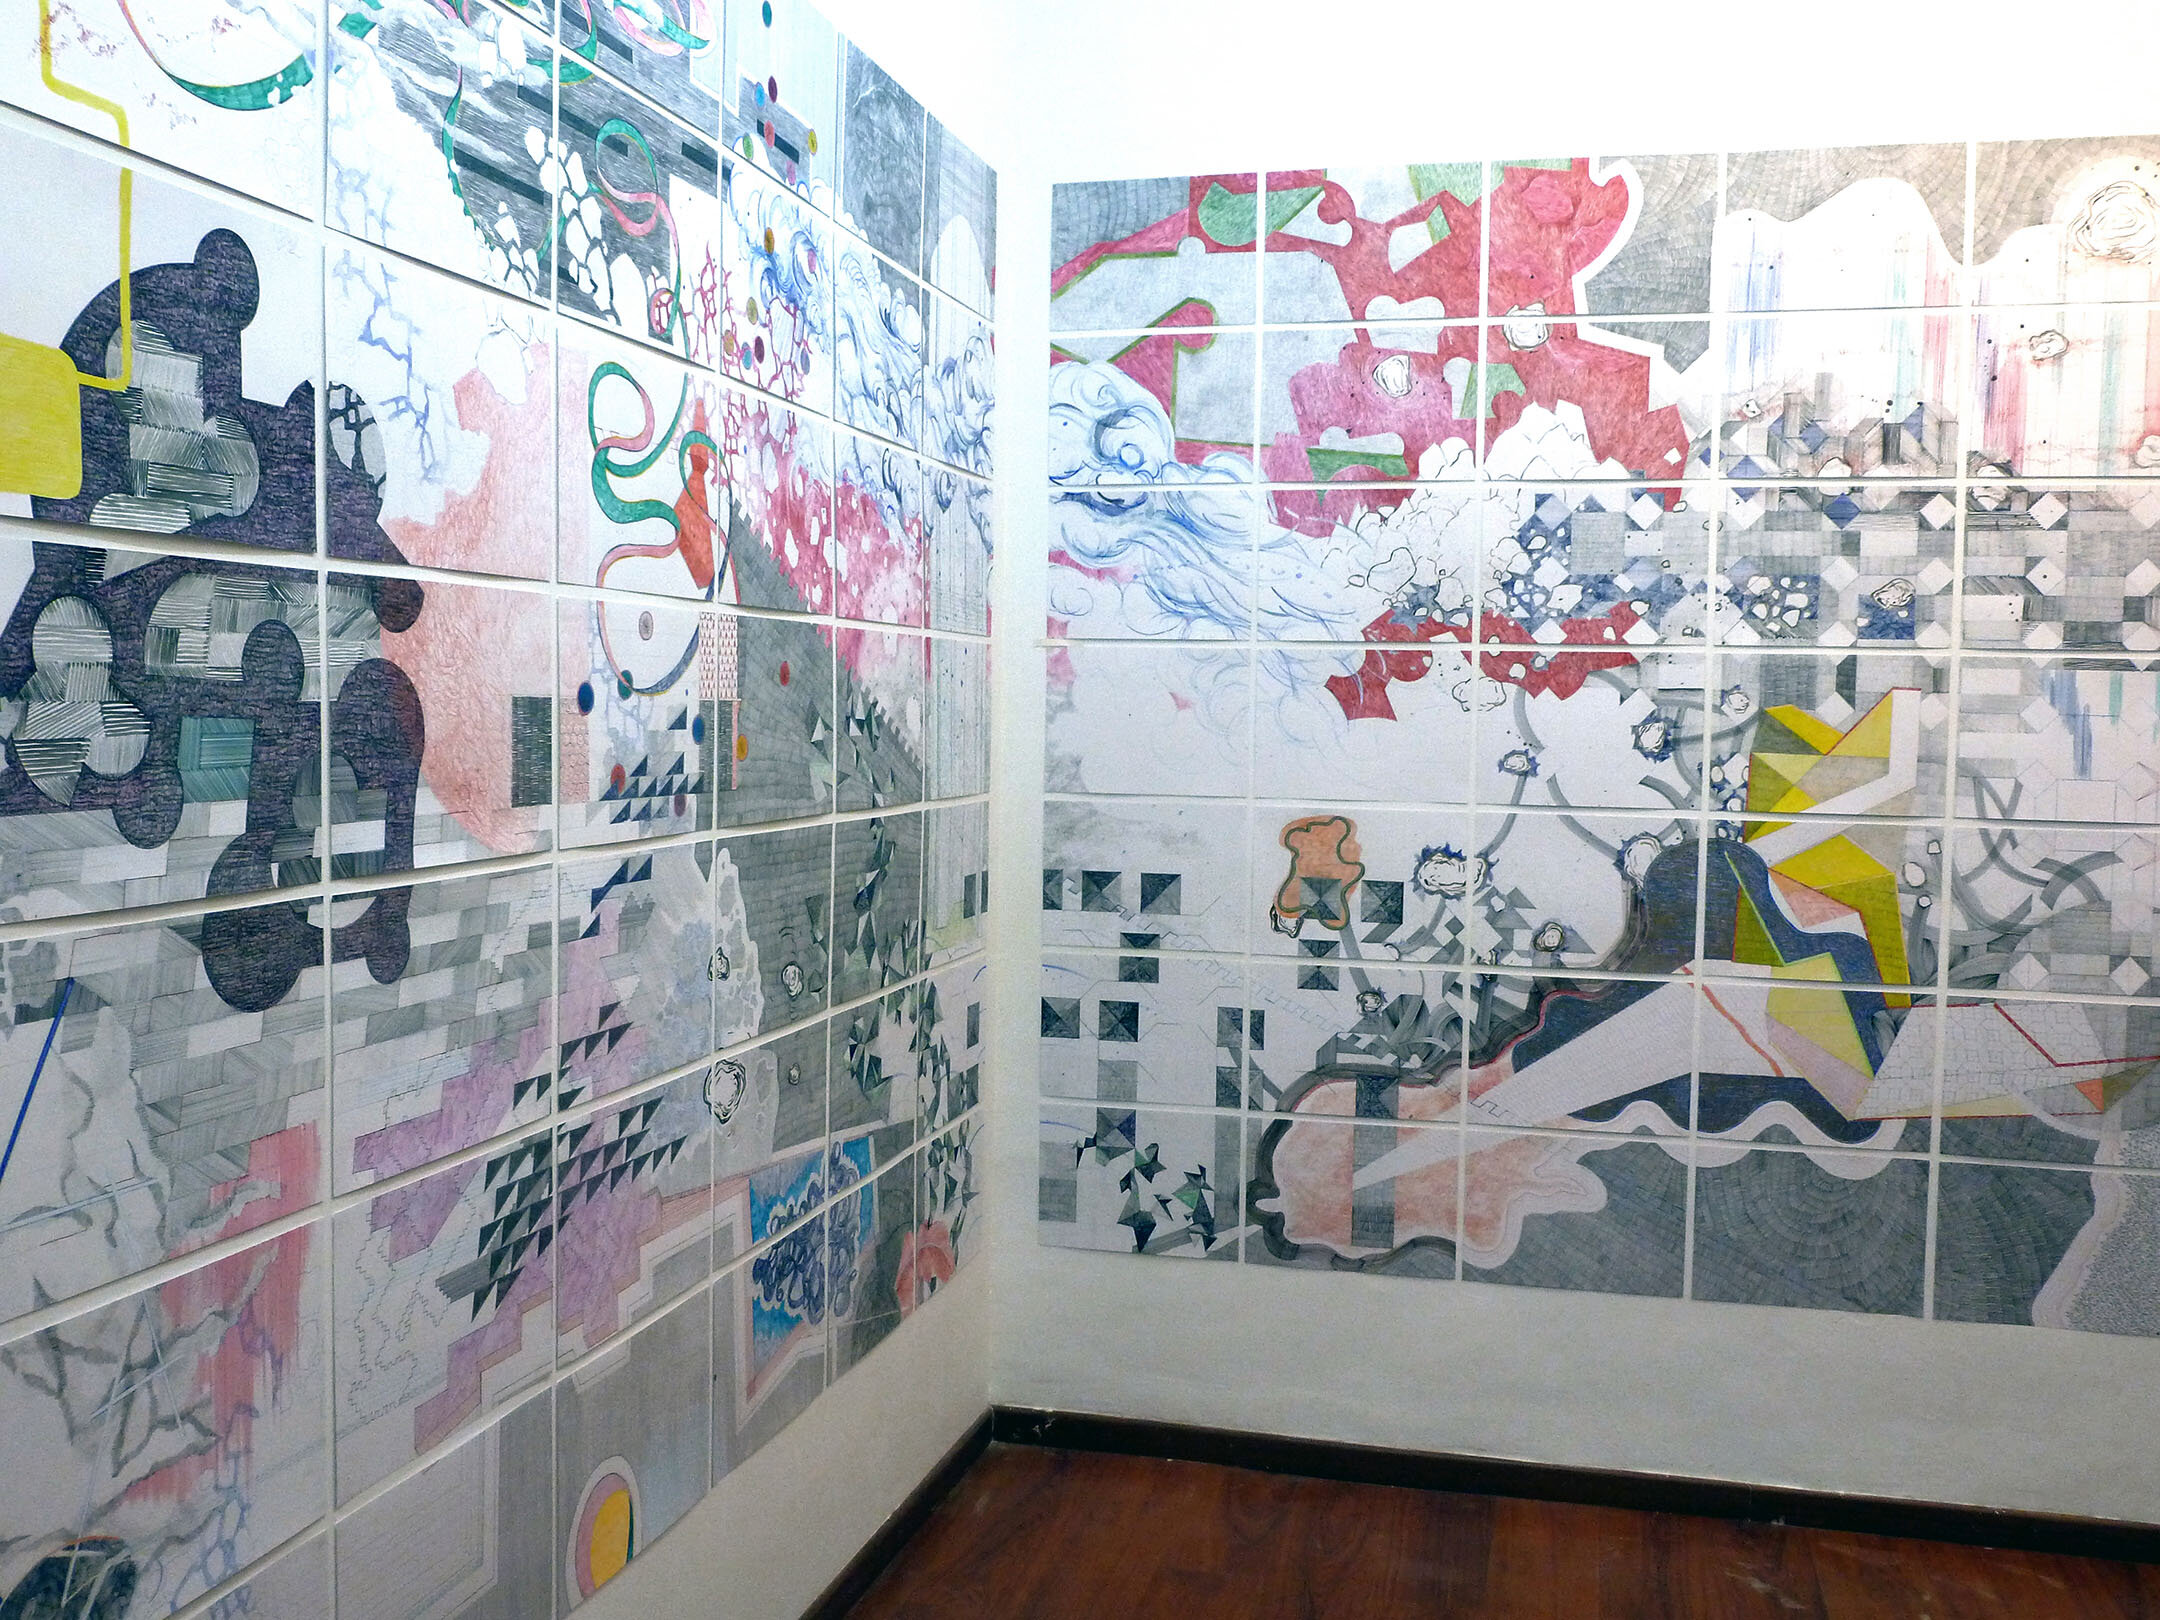 OLOT exhibition view at etHall Barcelona, 2011 